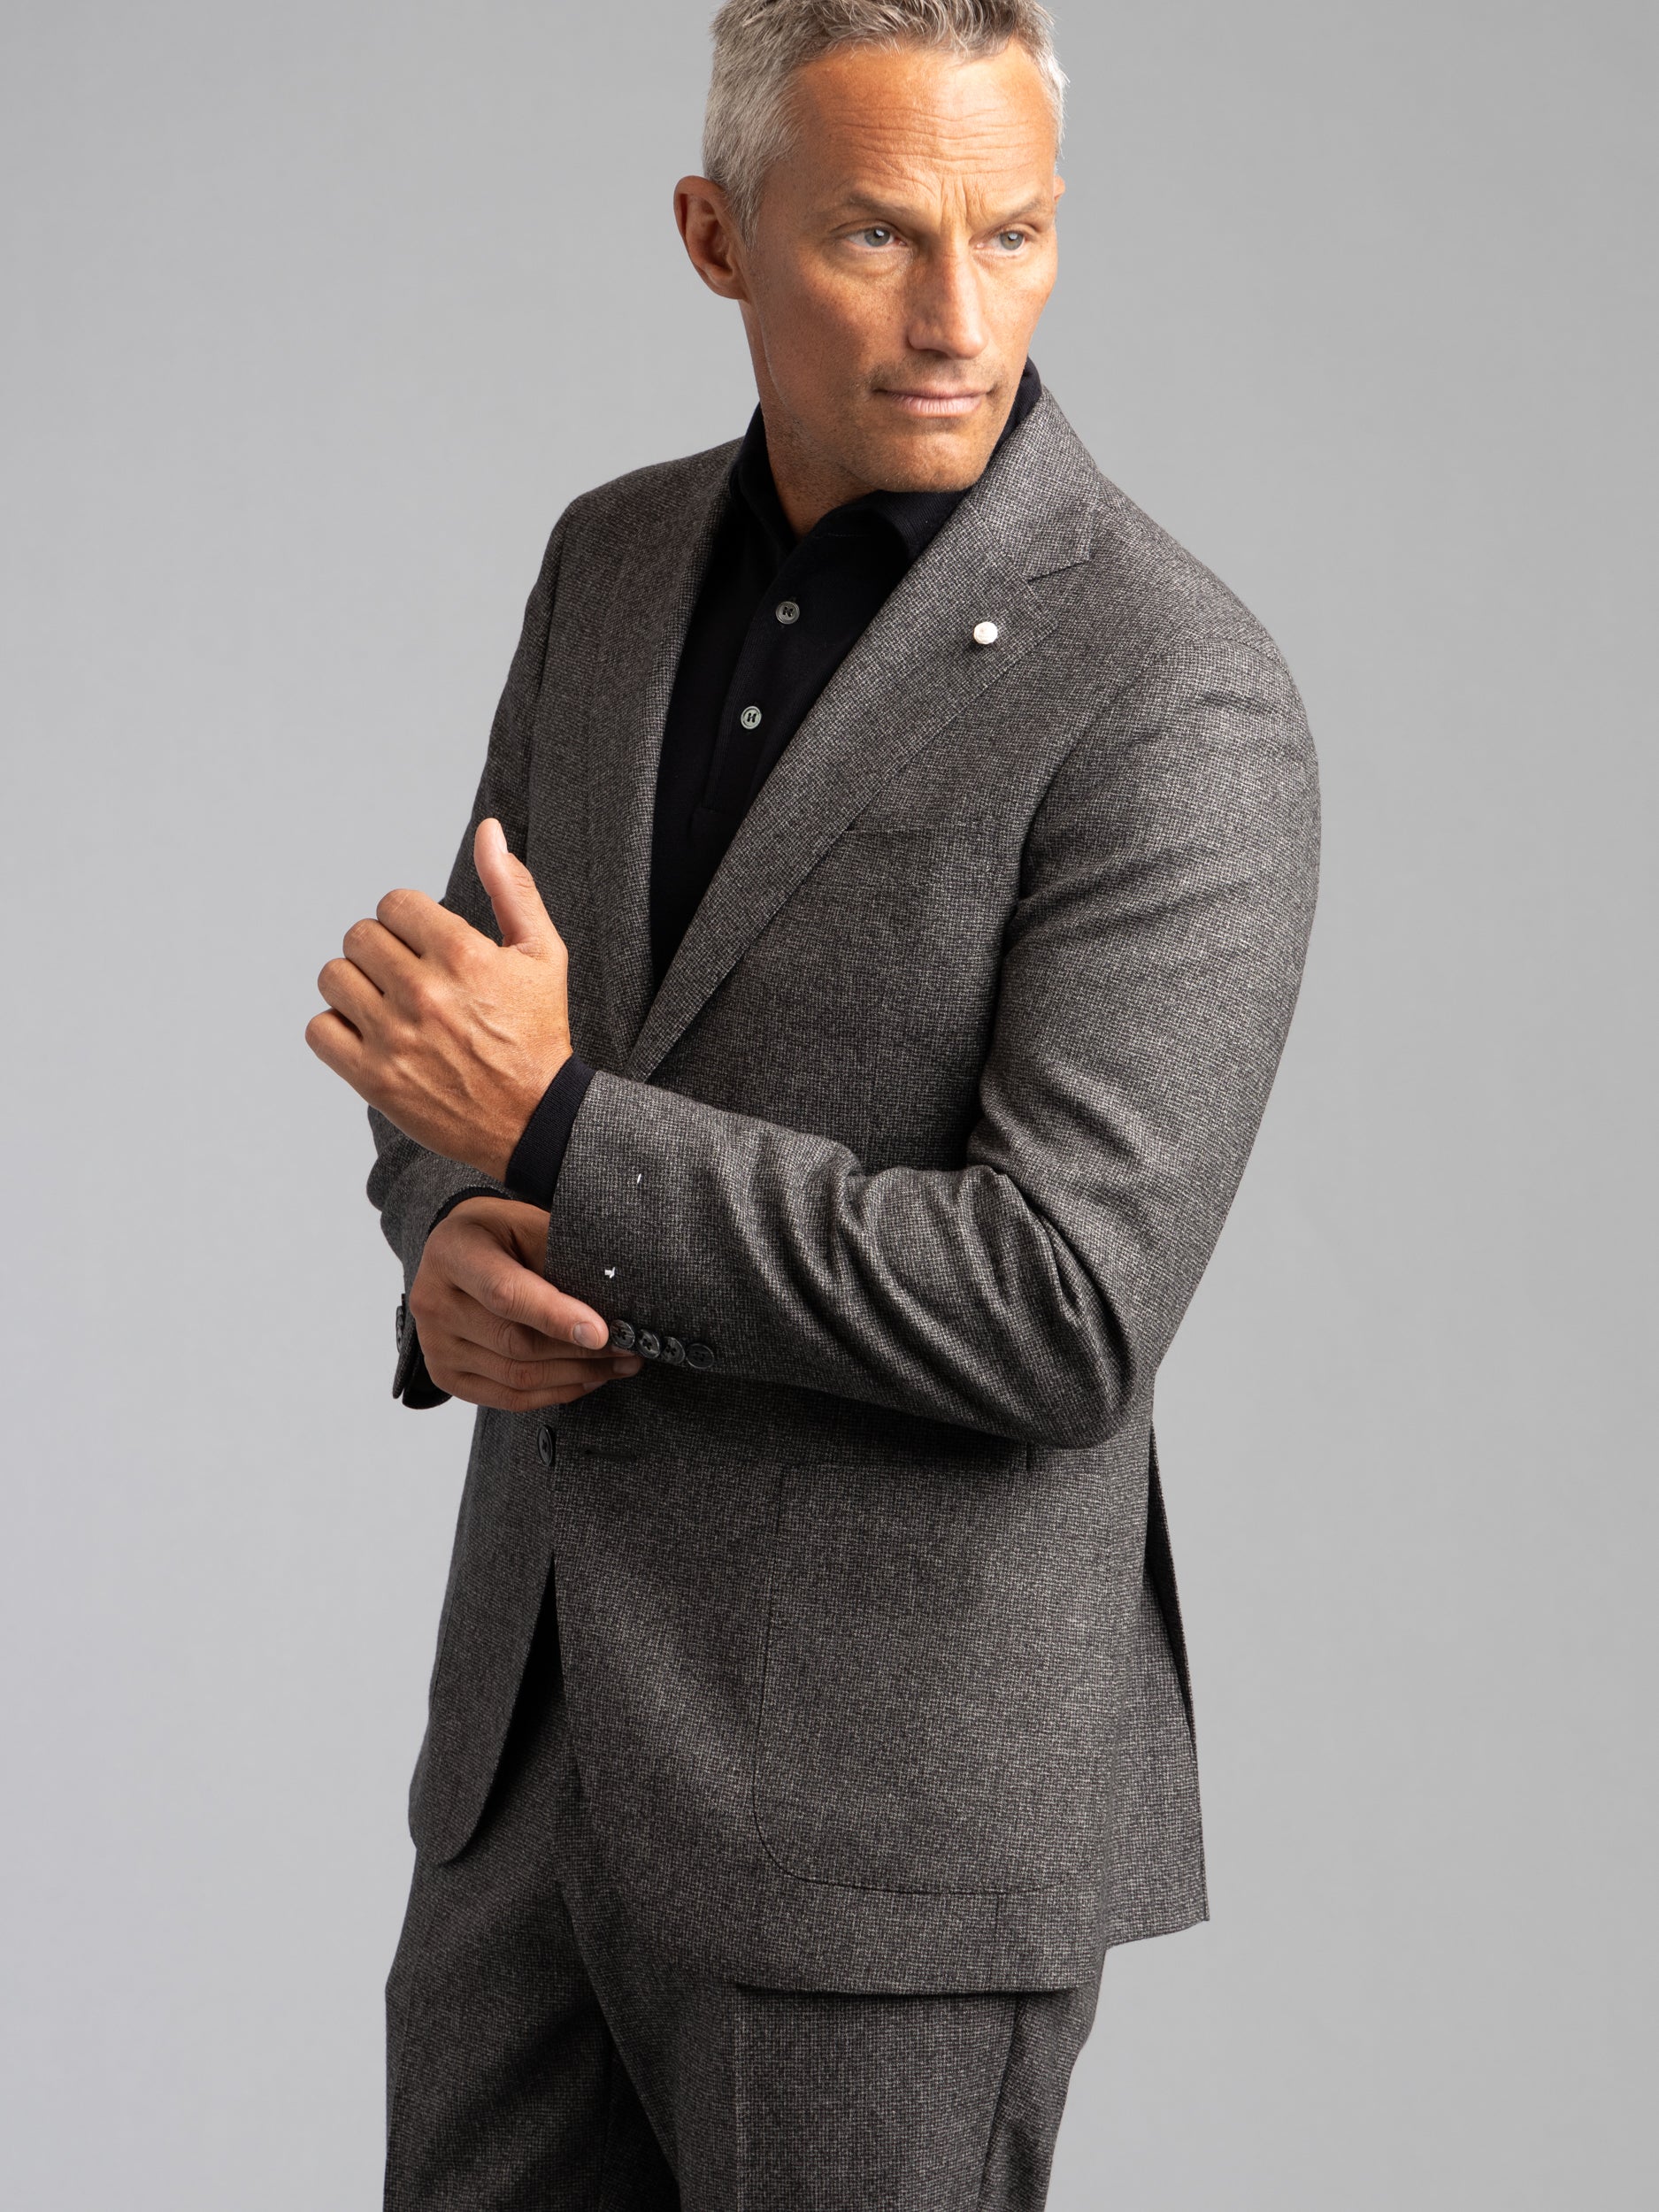 Grey Glen Check Wool Suit – The Helm Clothing